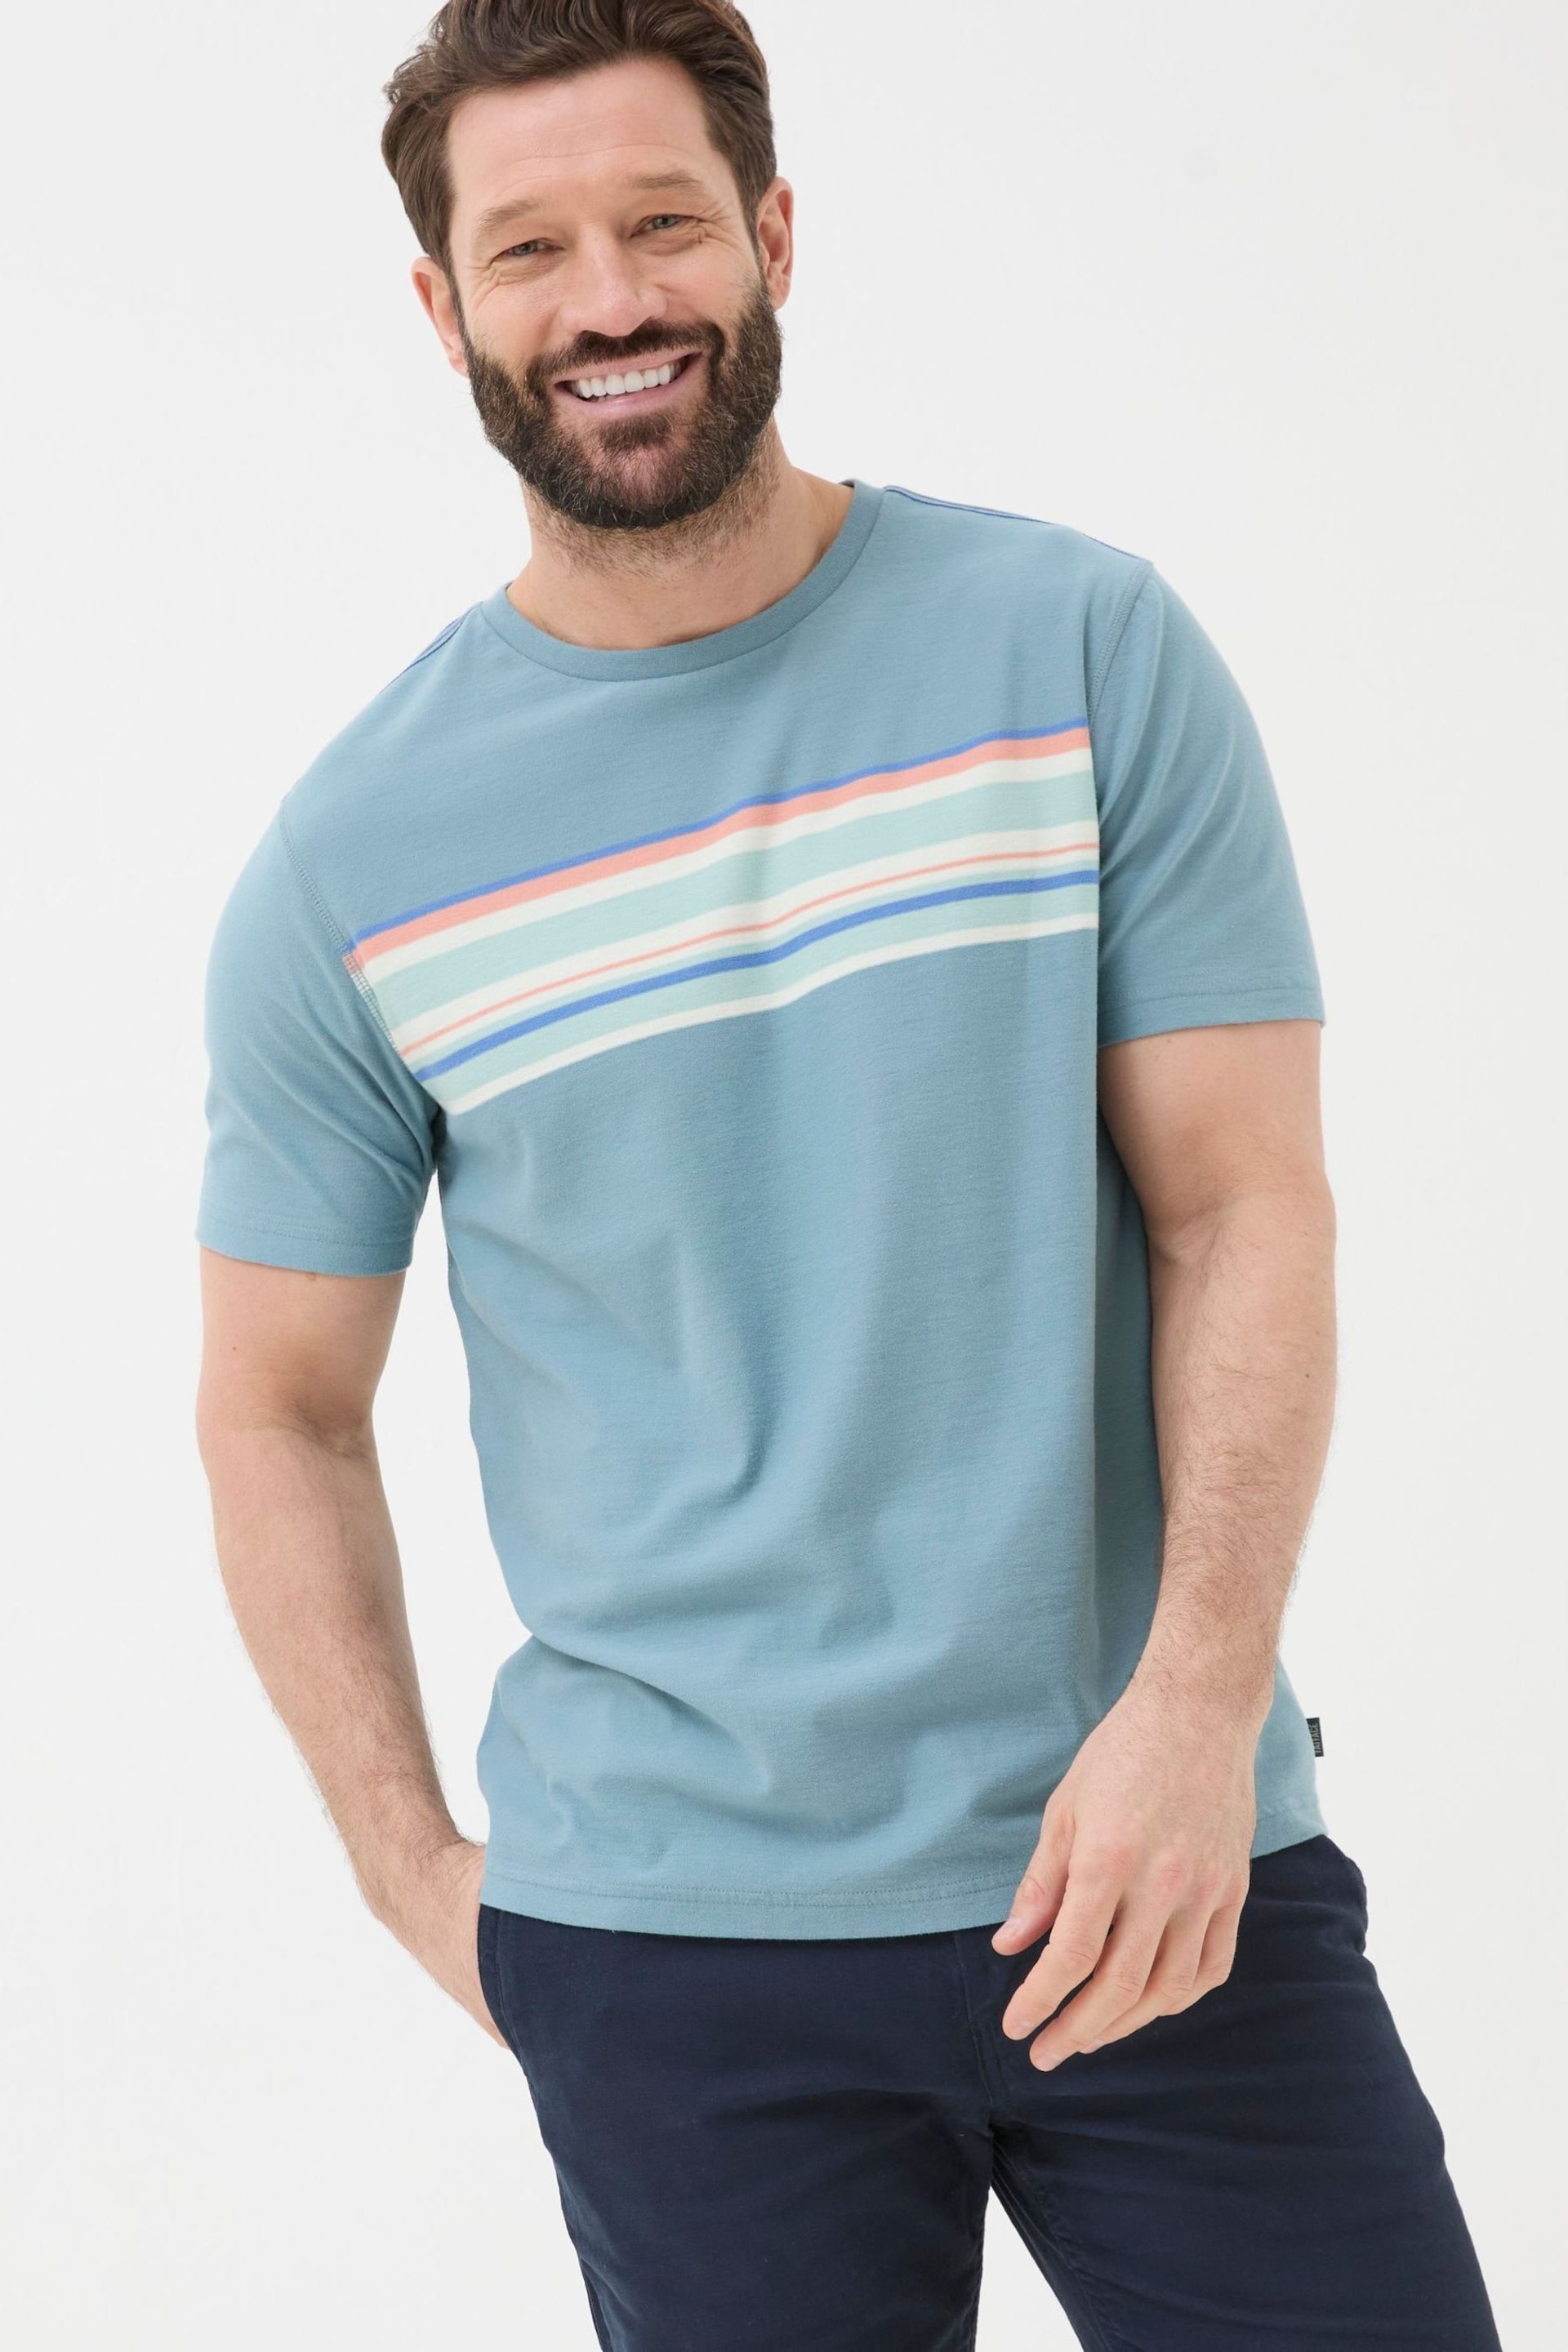 FatFace Blue Chest Stripe T-Shirt - Image 1 of 5